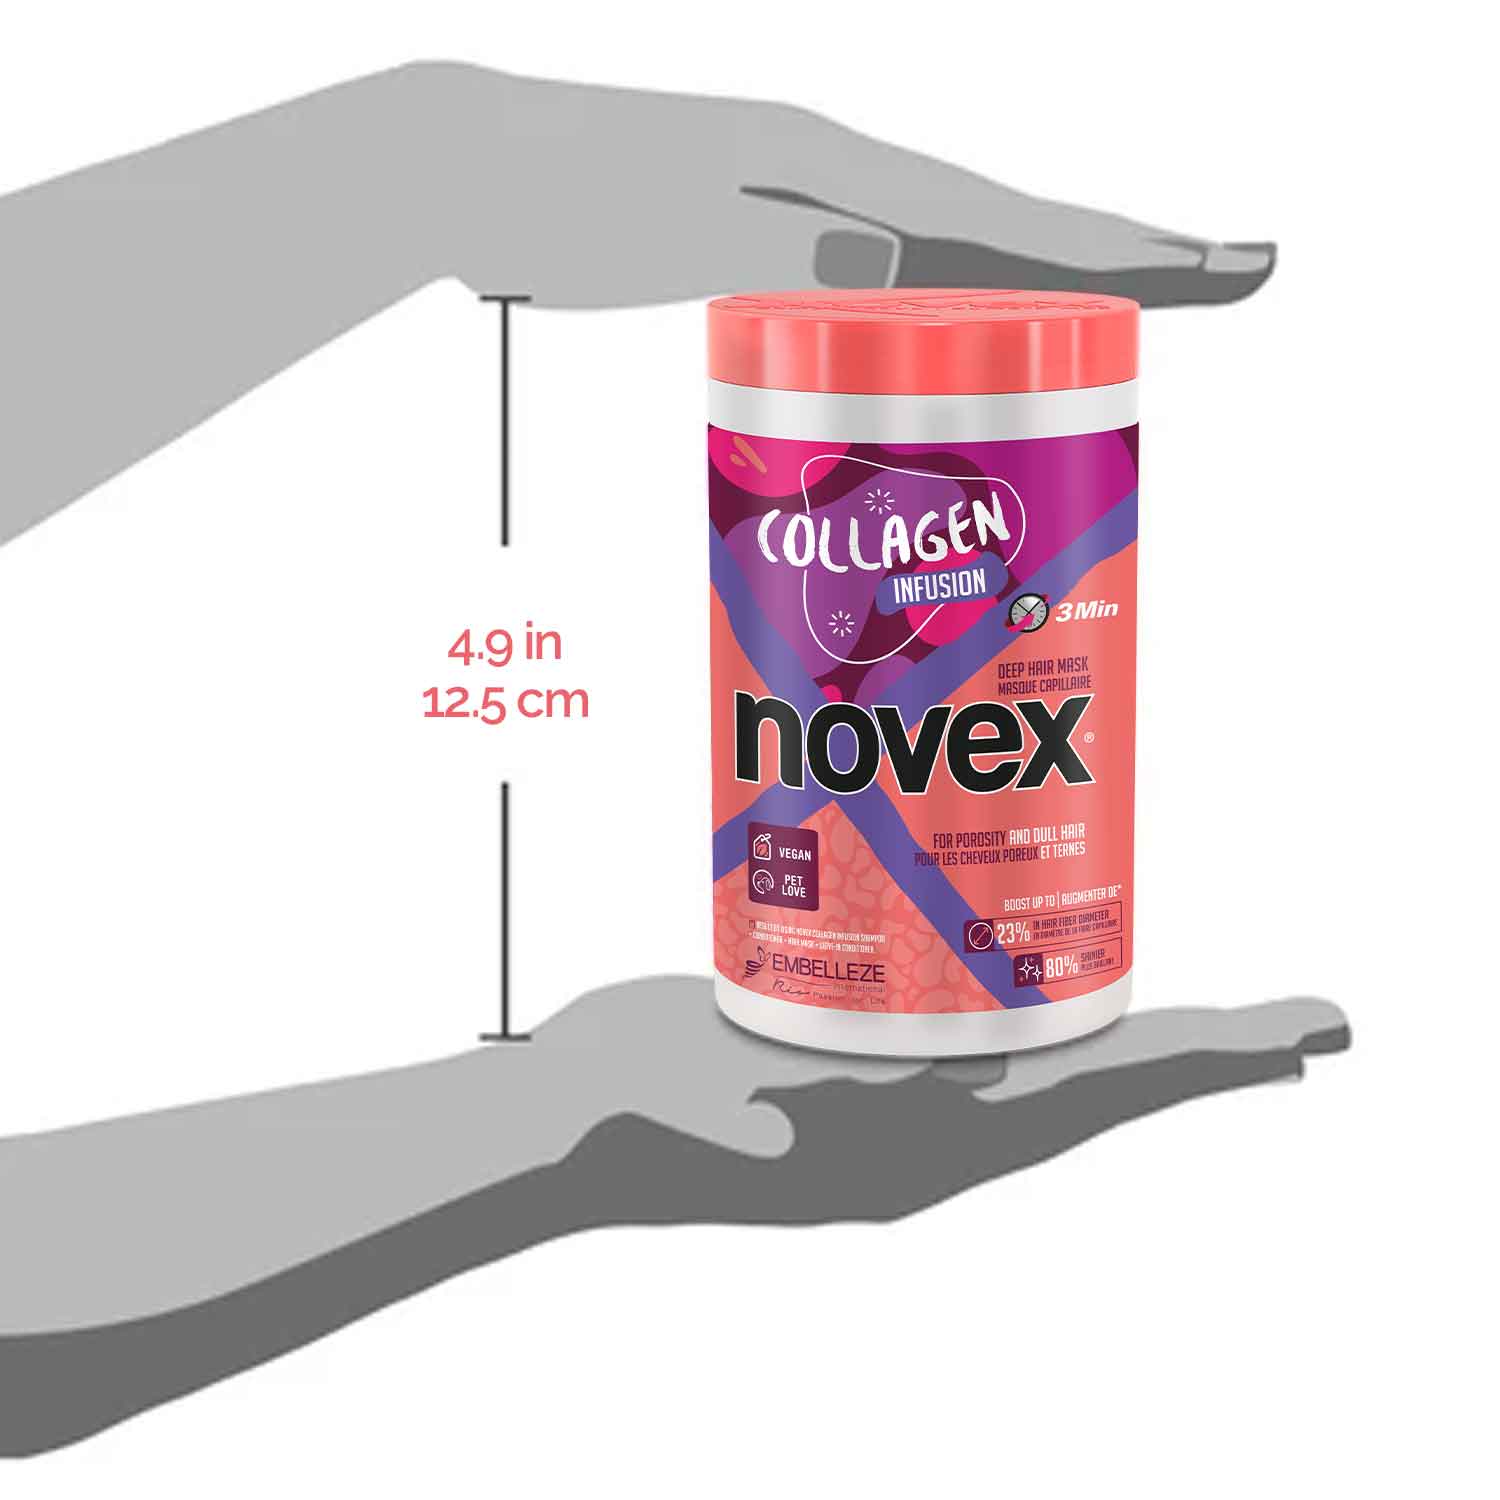 Collagen Infusion Hair Mask (400g) - Novex Hair Care